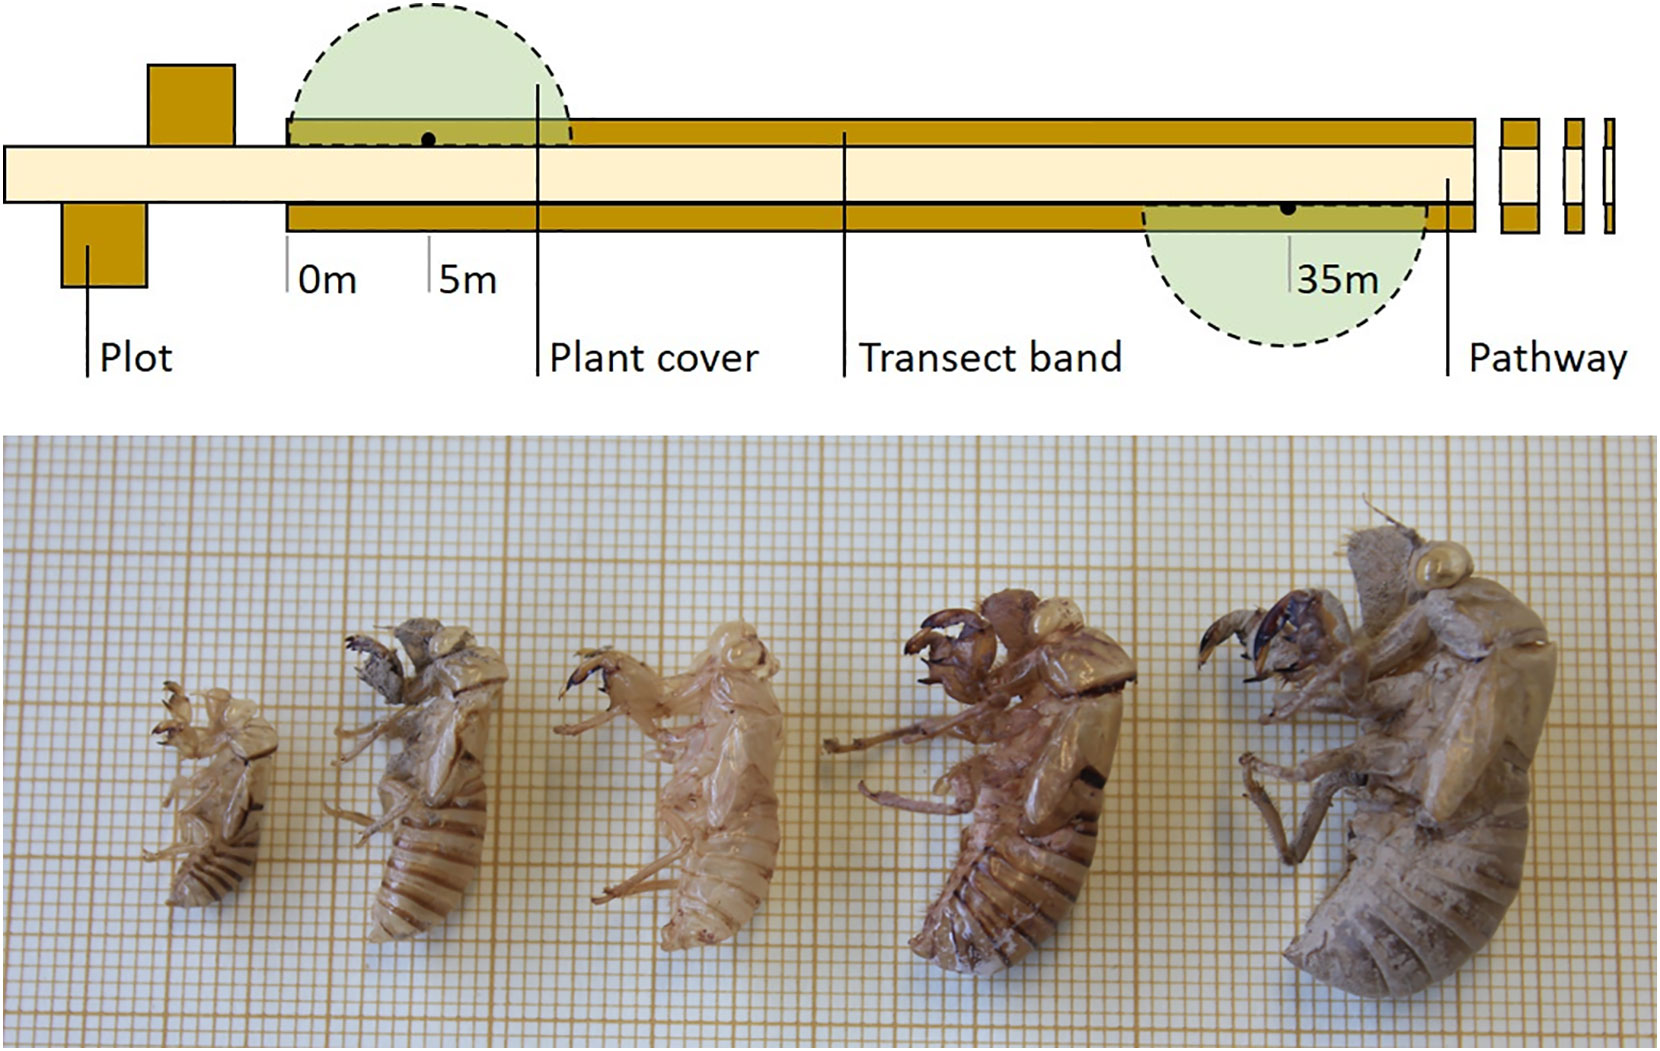 Cicada-MET: an efficient ecological monitoring protocol of cicada populations